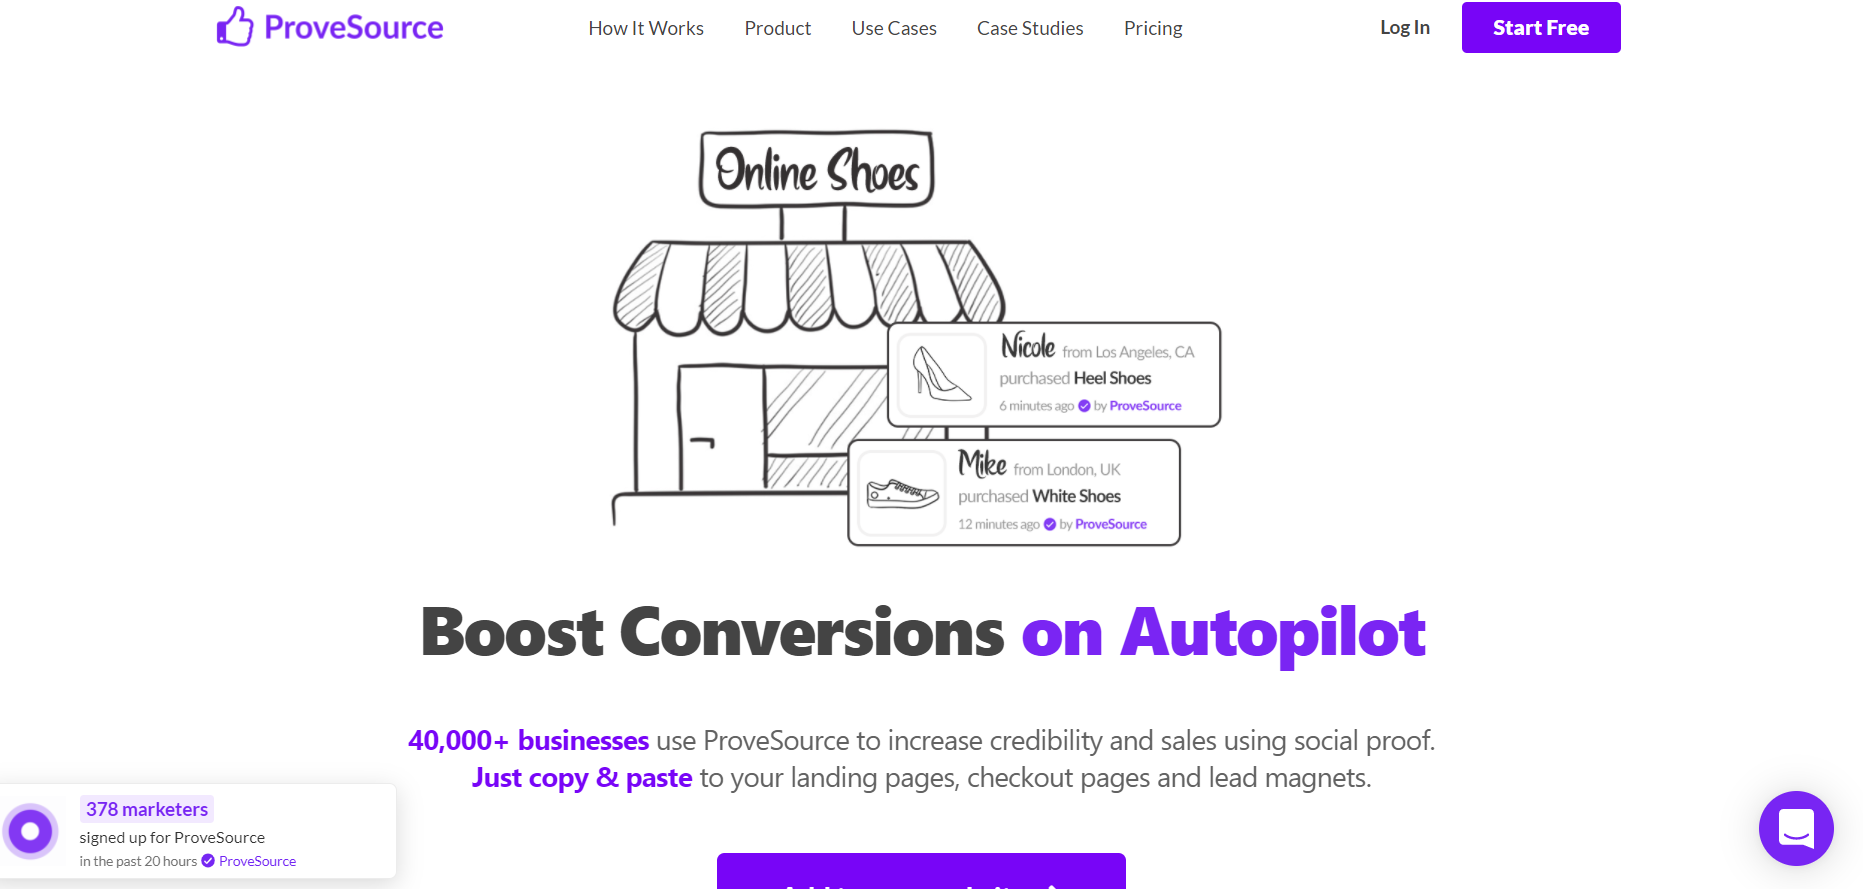 ProveSource homepage: Boost Conversions on Autopilot.